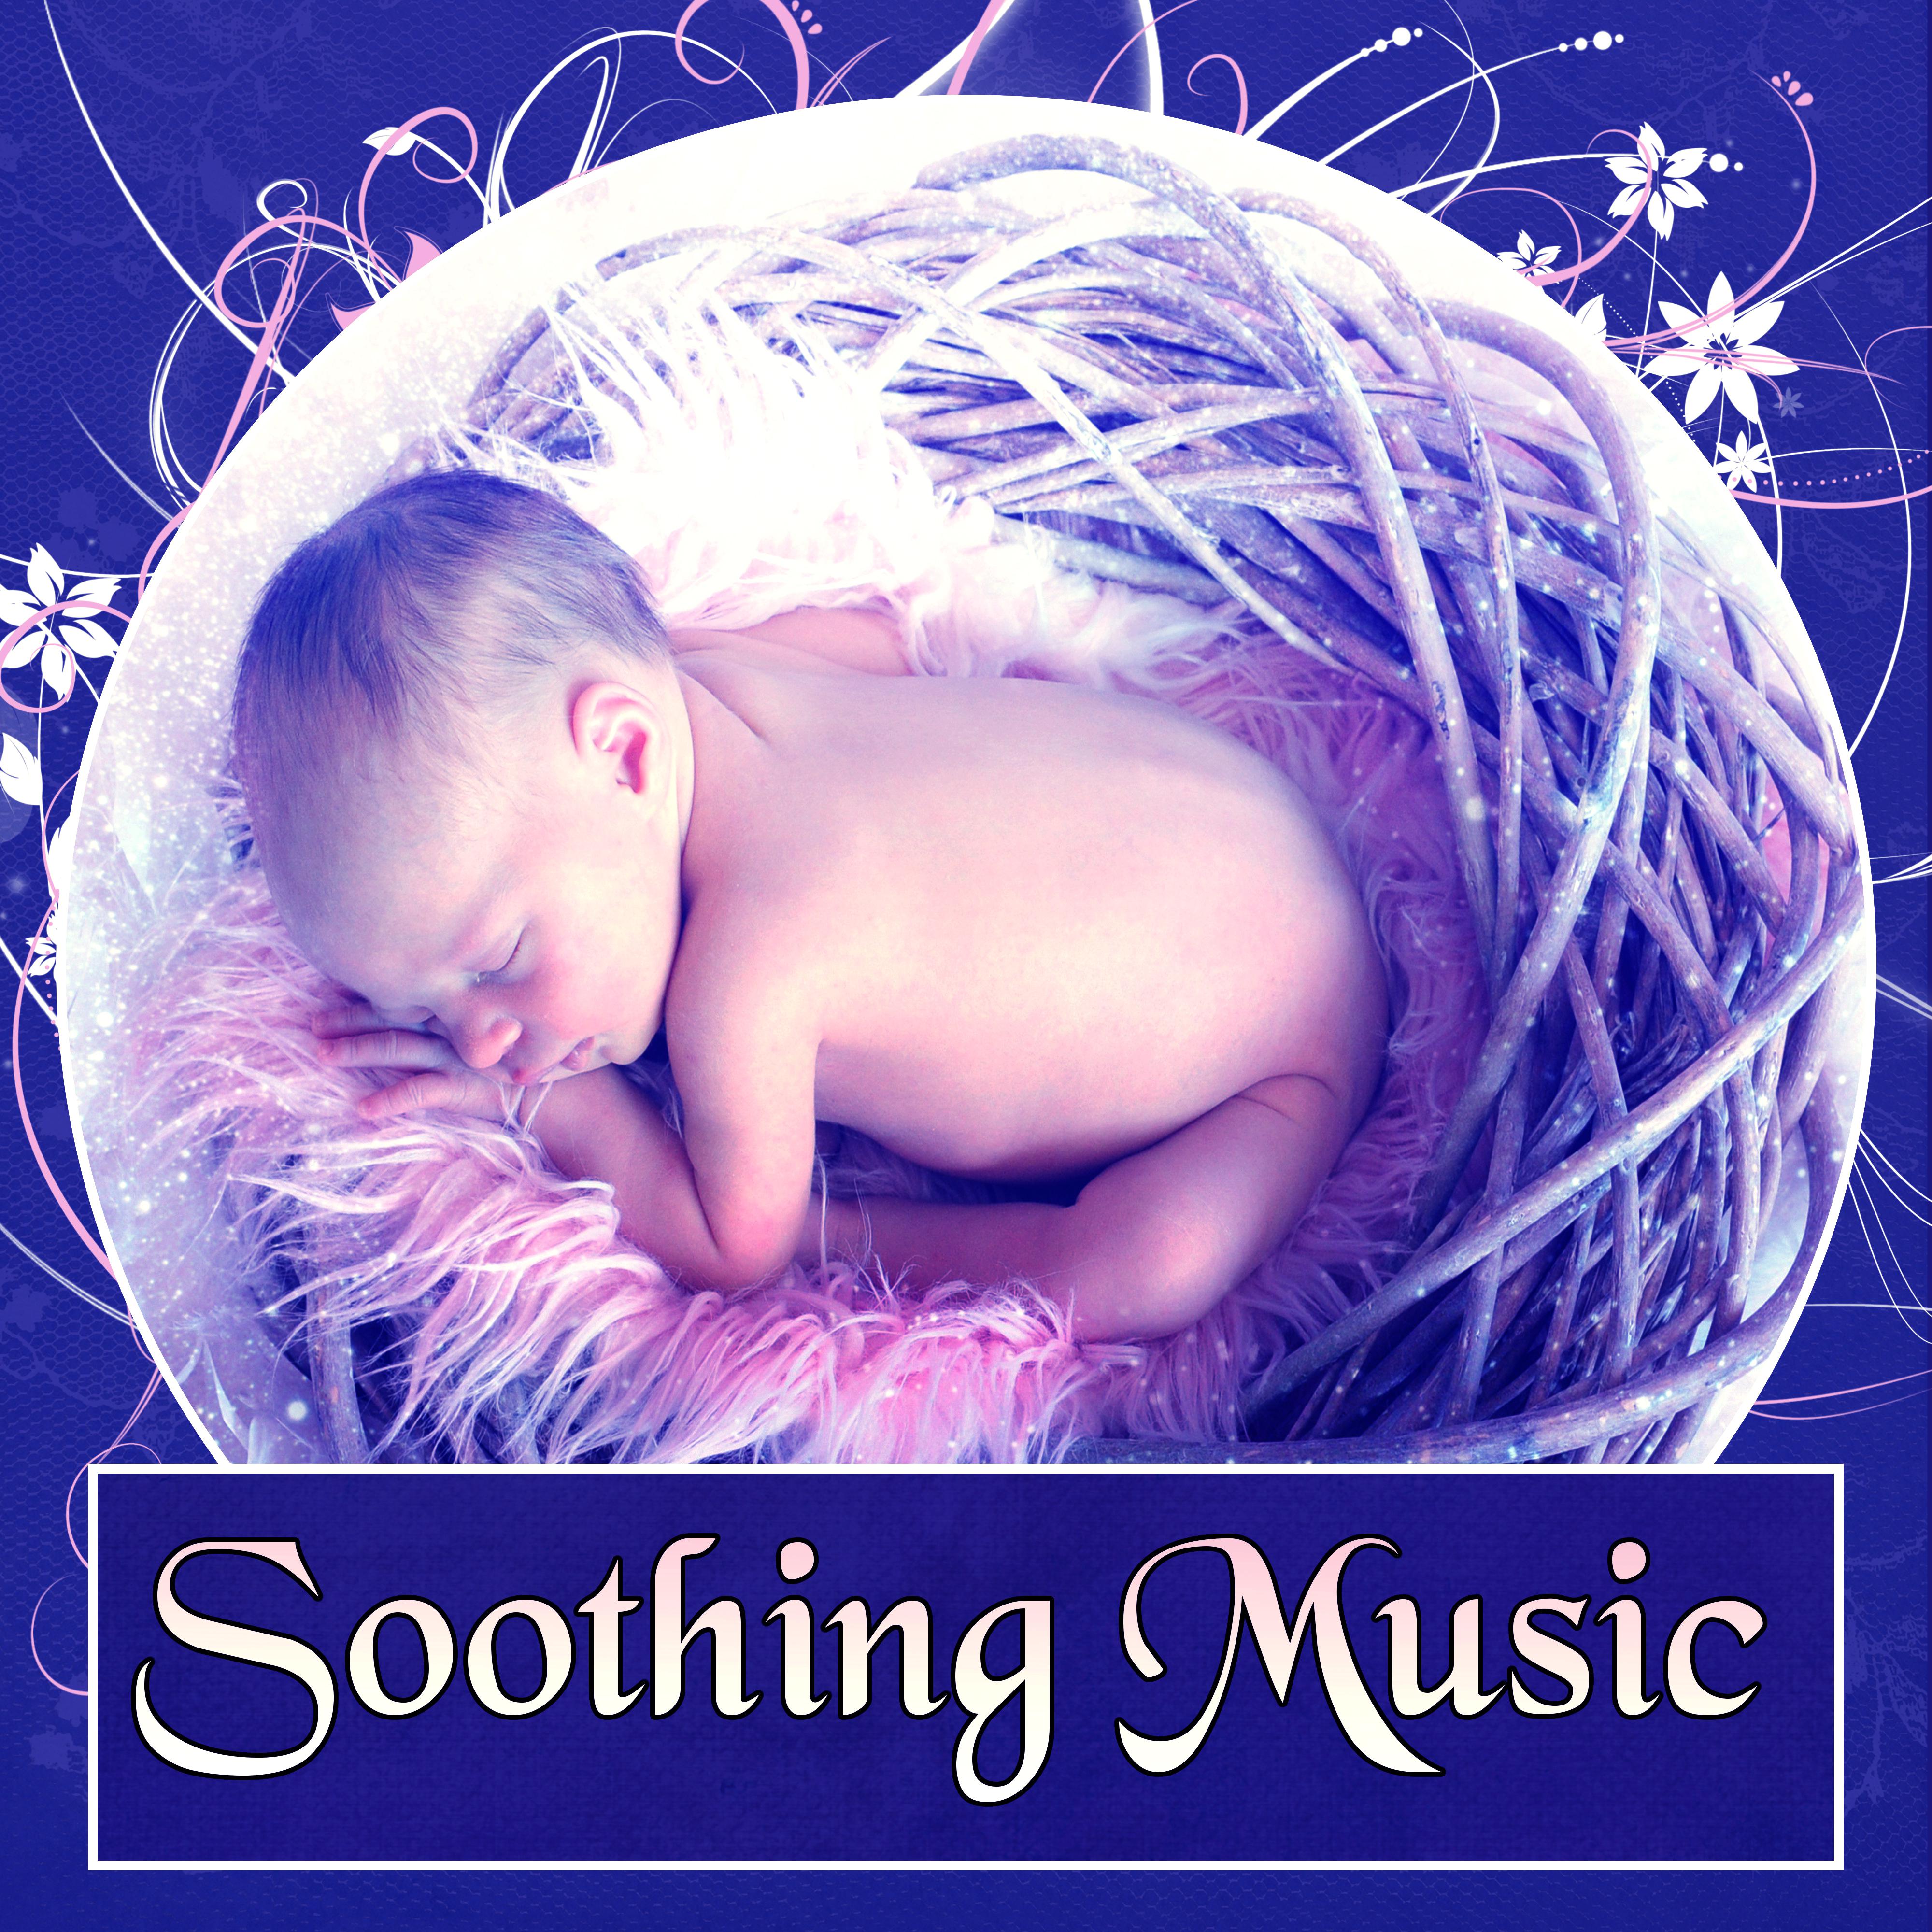 Soothing Music - Baby Sleep Lullaby, Relaxing Nature Sounds, Beautiful Sleep Music, Calming Down Melodies, Calm Music for Deep Sleep, Slumber